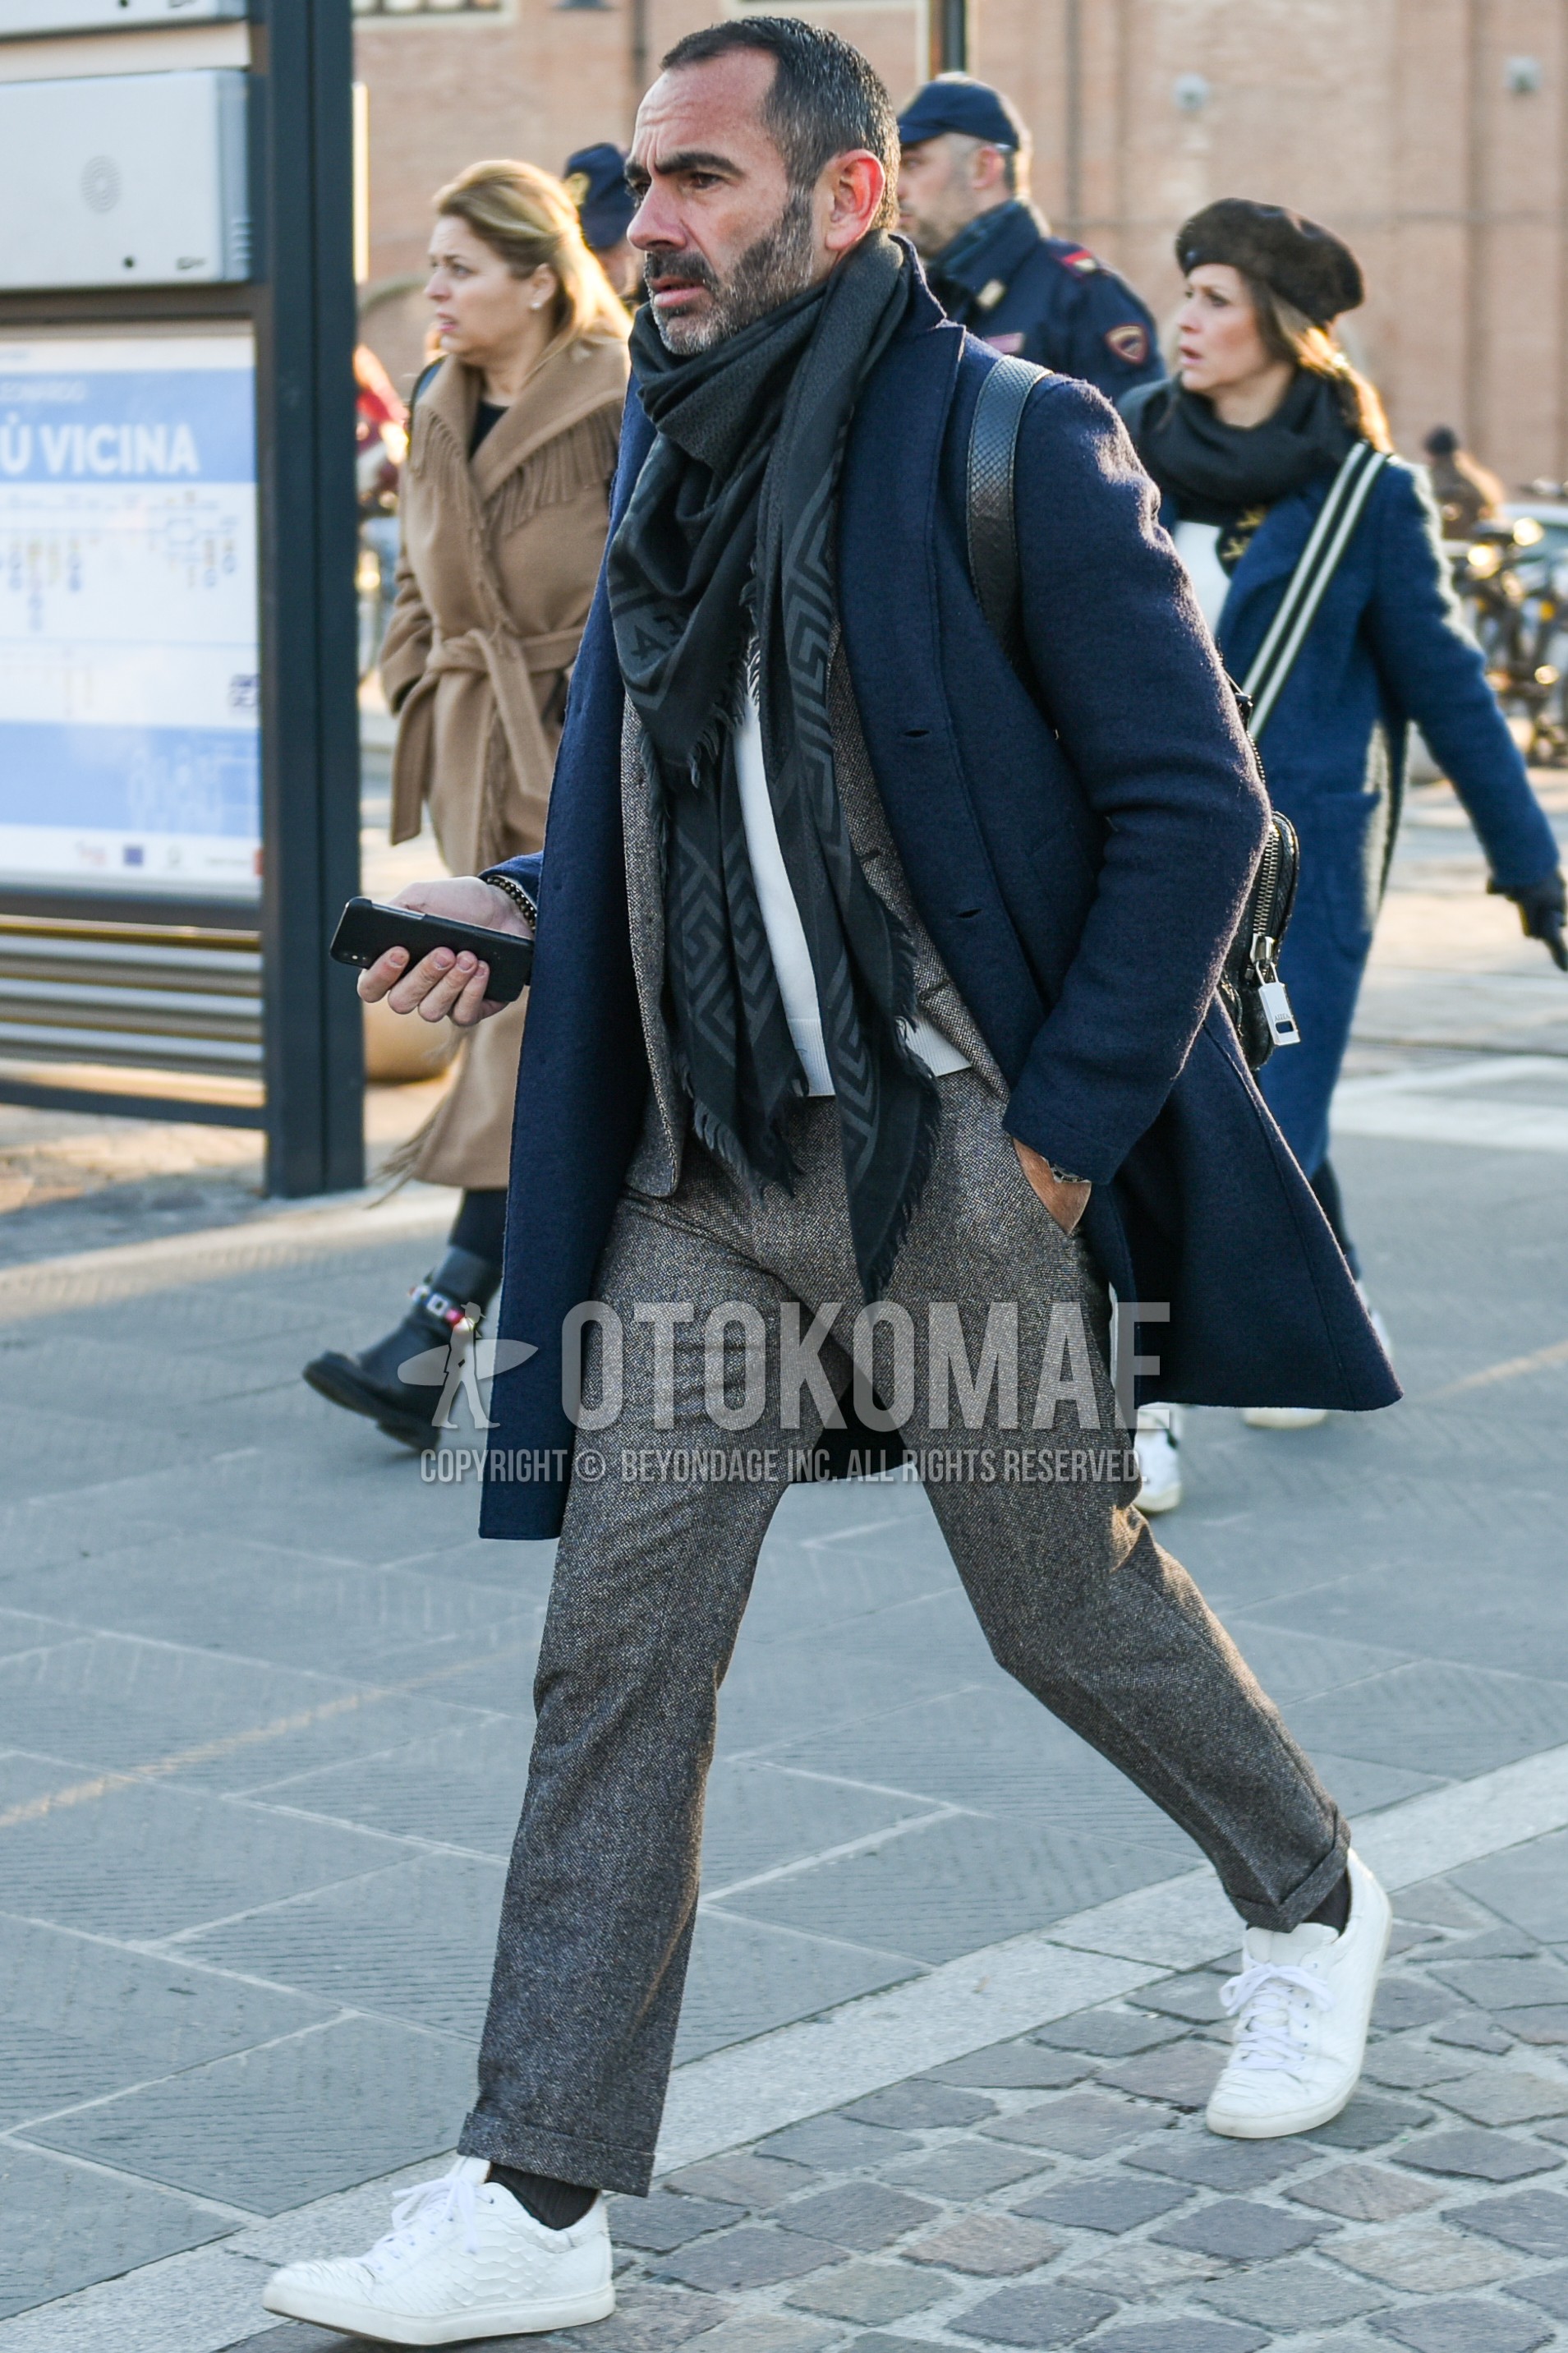 Men's autumn winter outfit with gray scarf scarf, gray plain chester coat, gray plain socks, white low-cut sneakers, gray plain suit.